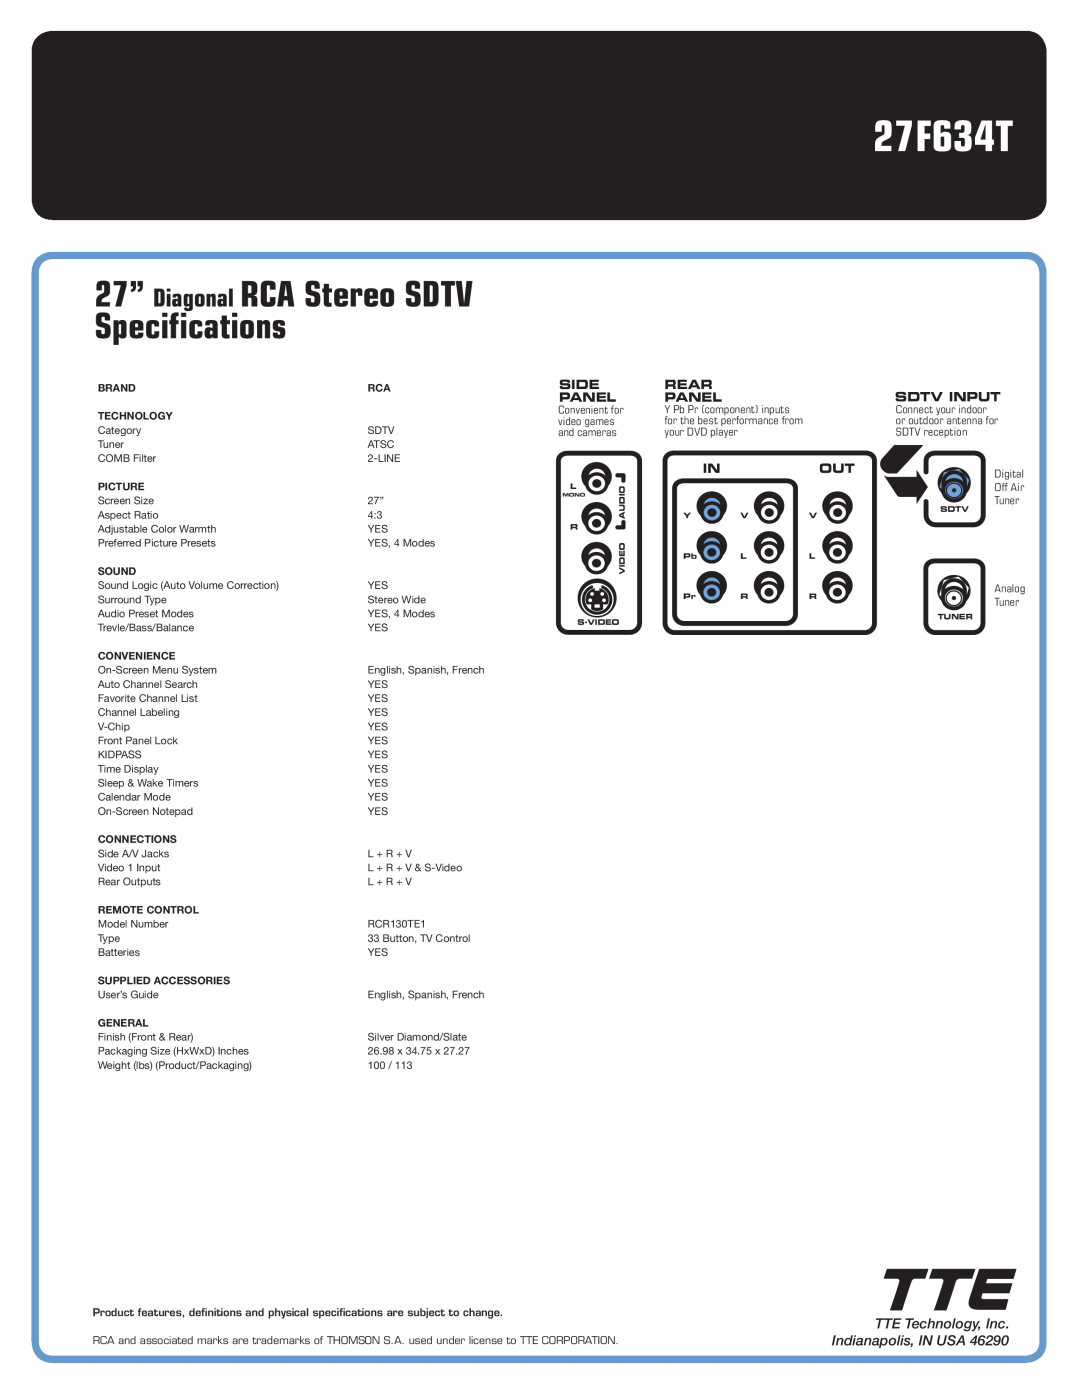 RCA 27F634T 27” Diagonal RCA Stereo SDTV Specifications, TTE Technology, Inc. Indianapolis, IN USA, Side Panel, Rear Panel 